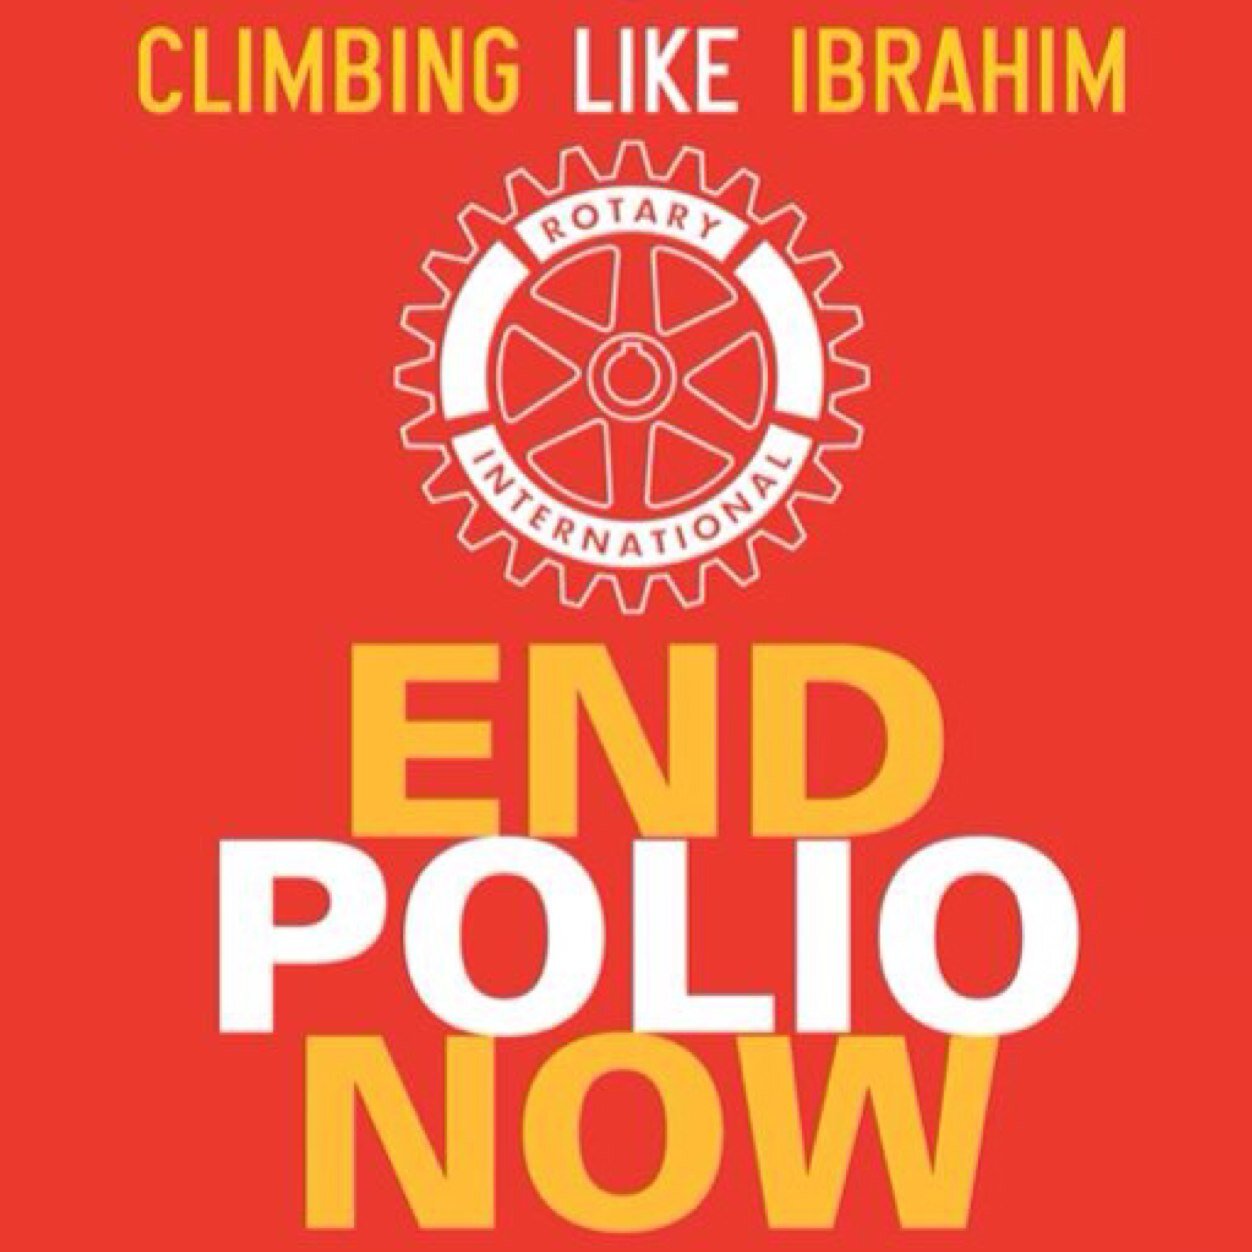 Join us in order to make sure that no 
child will ever have to confront the Kilimanjaro 
to simply get to go to school. #Rotary #Kilimanjaro #endpolio